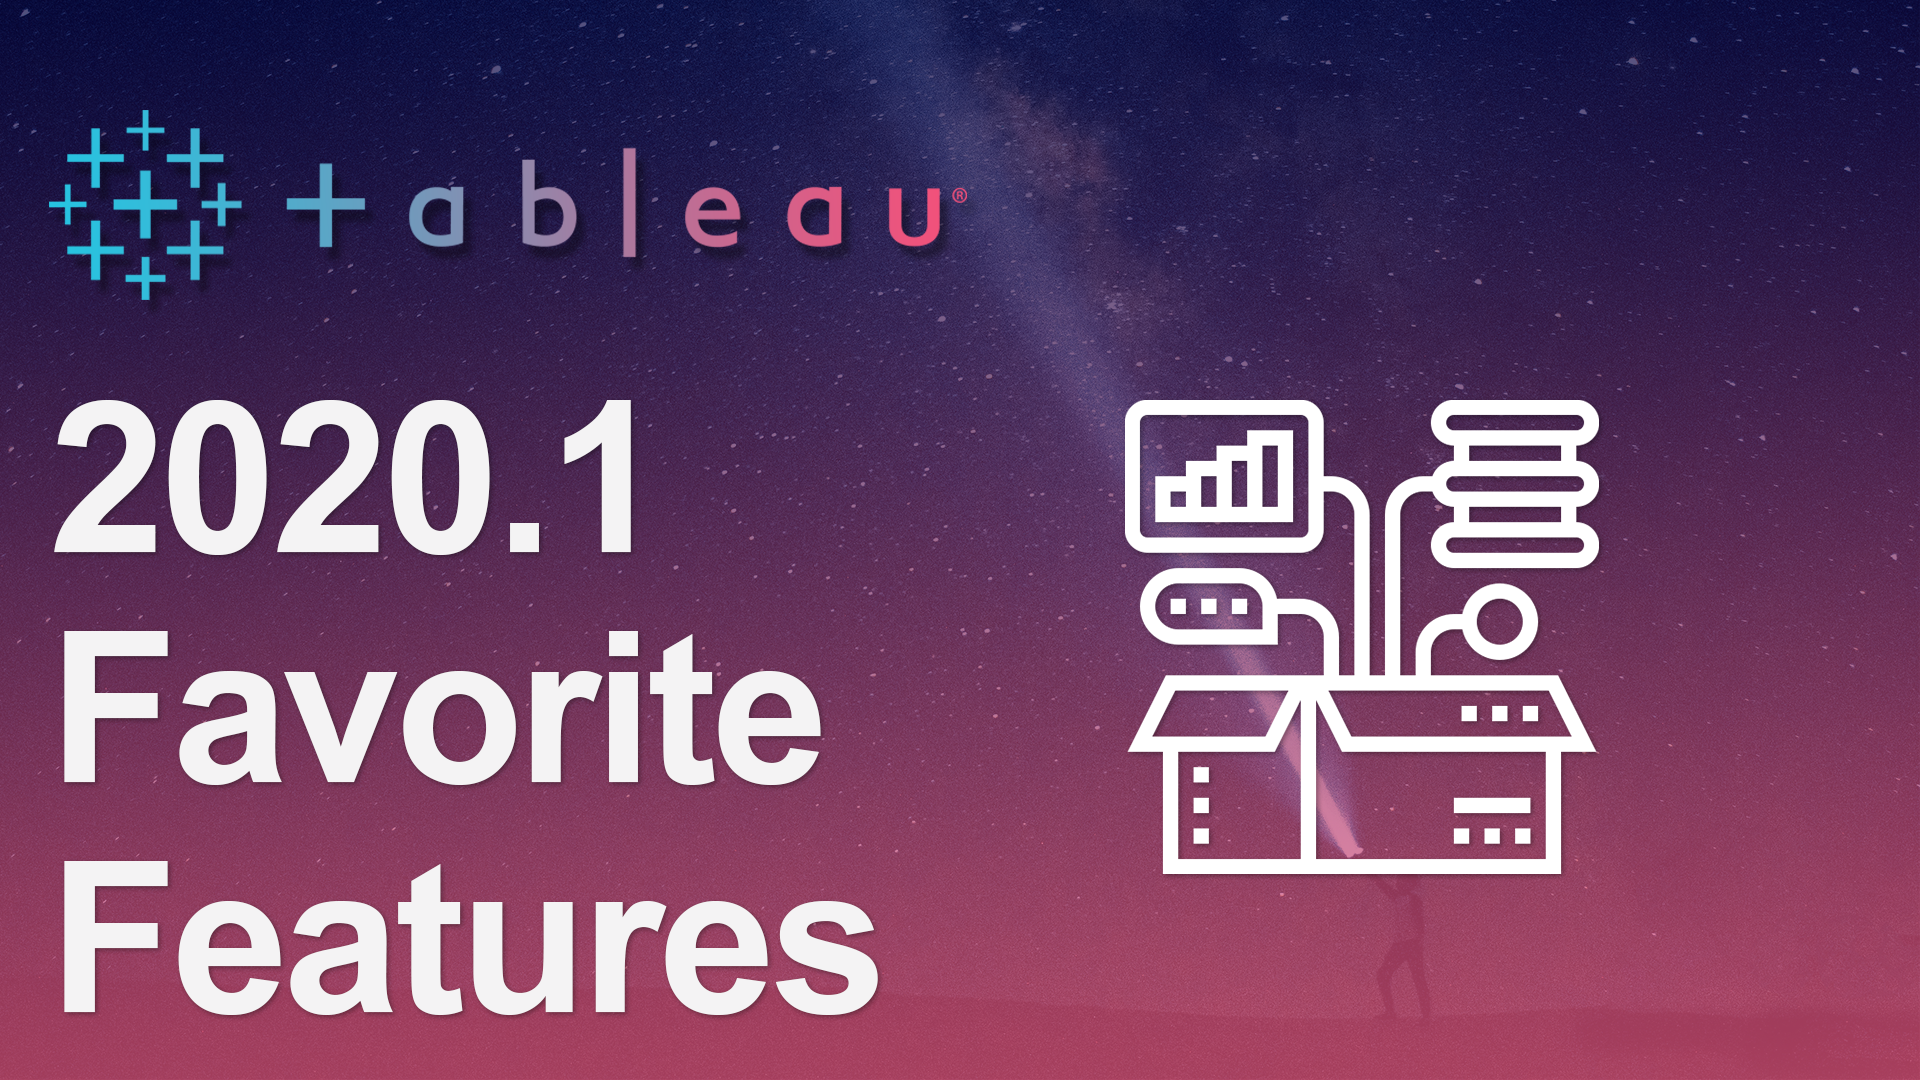 Top 5 Features of Tableau v2020.1